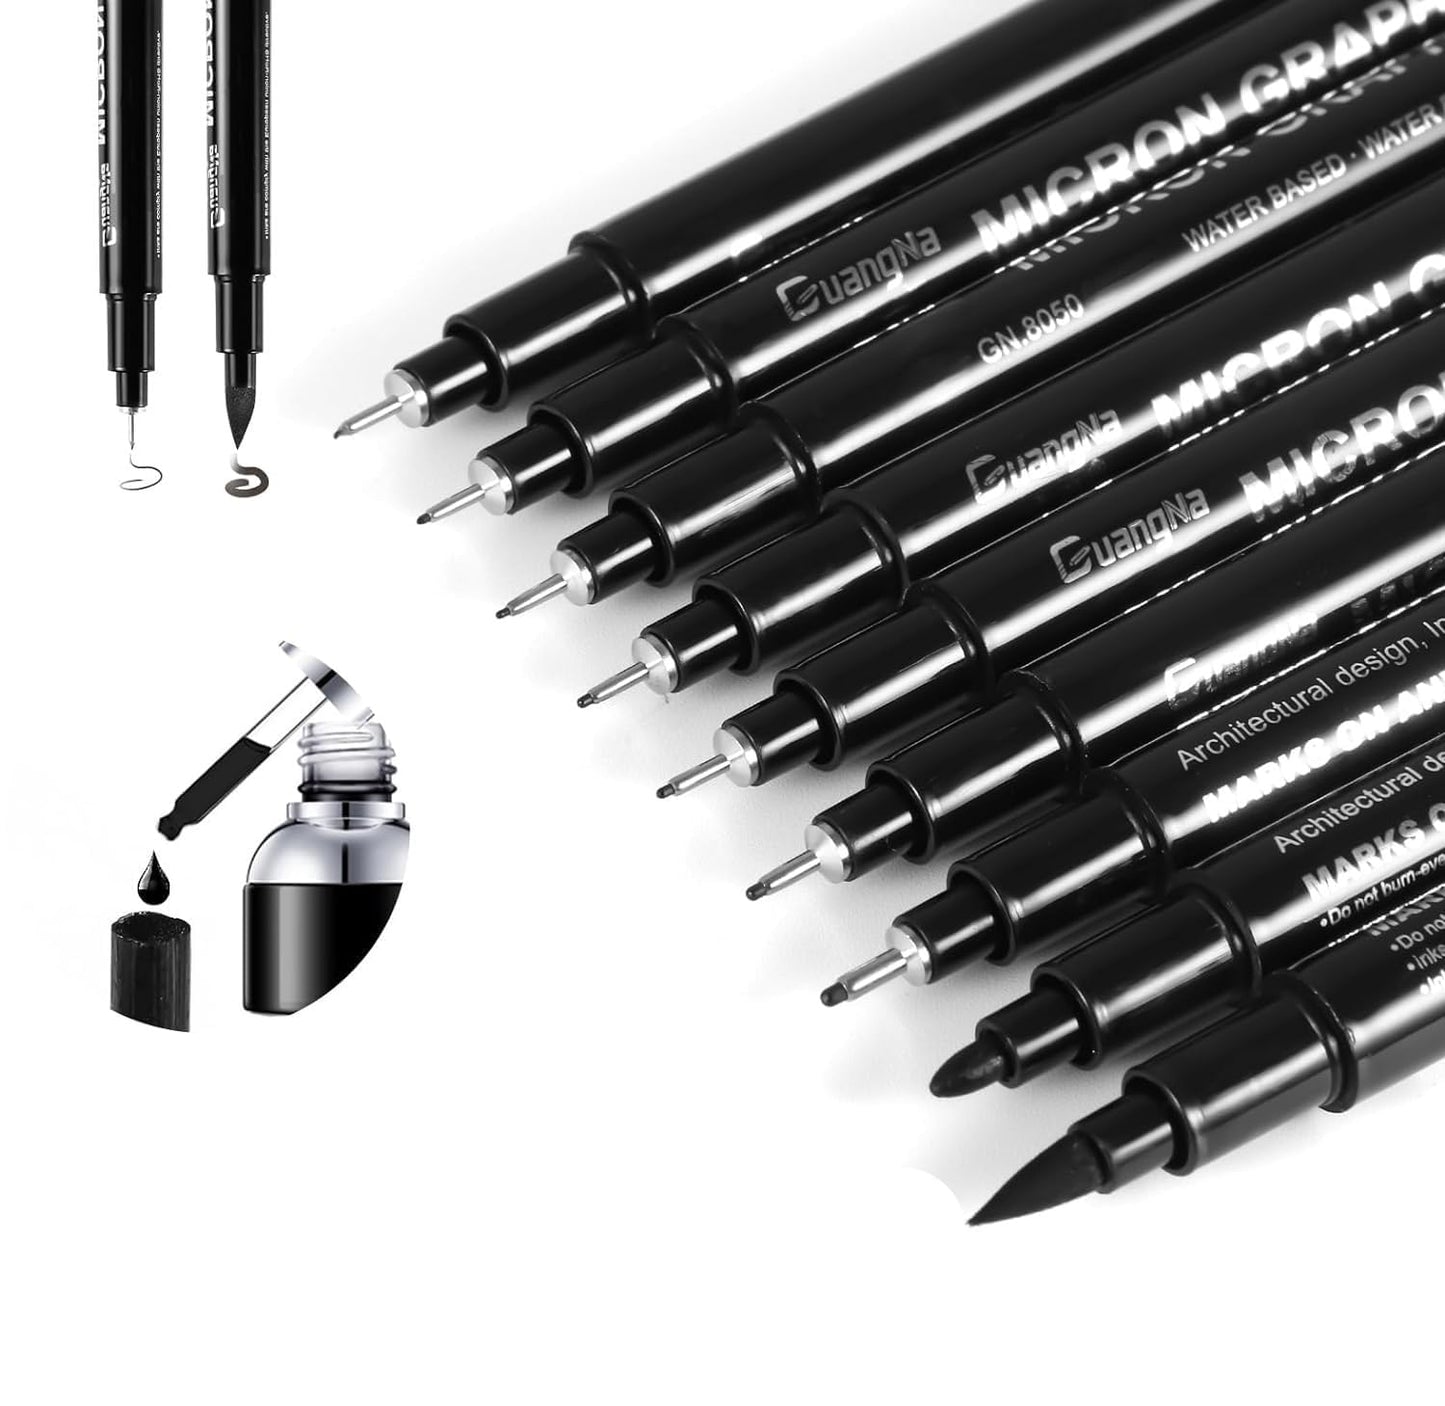 ART & CRAFT 9 PCS Micron Pens, Calligraphy Pen Set Black Archival Ink Refillable Fine Point Drawing Pens for Writing, Watercolor, Sketching, Anime, Manga, Art Supplie Assorted Point Sizes